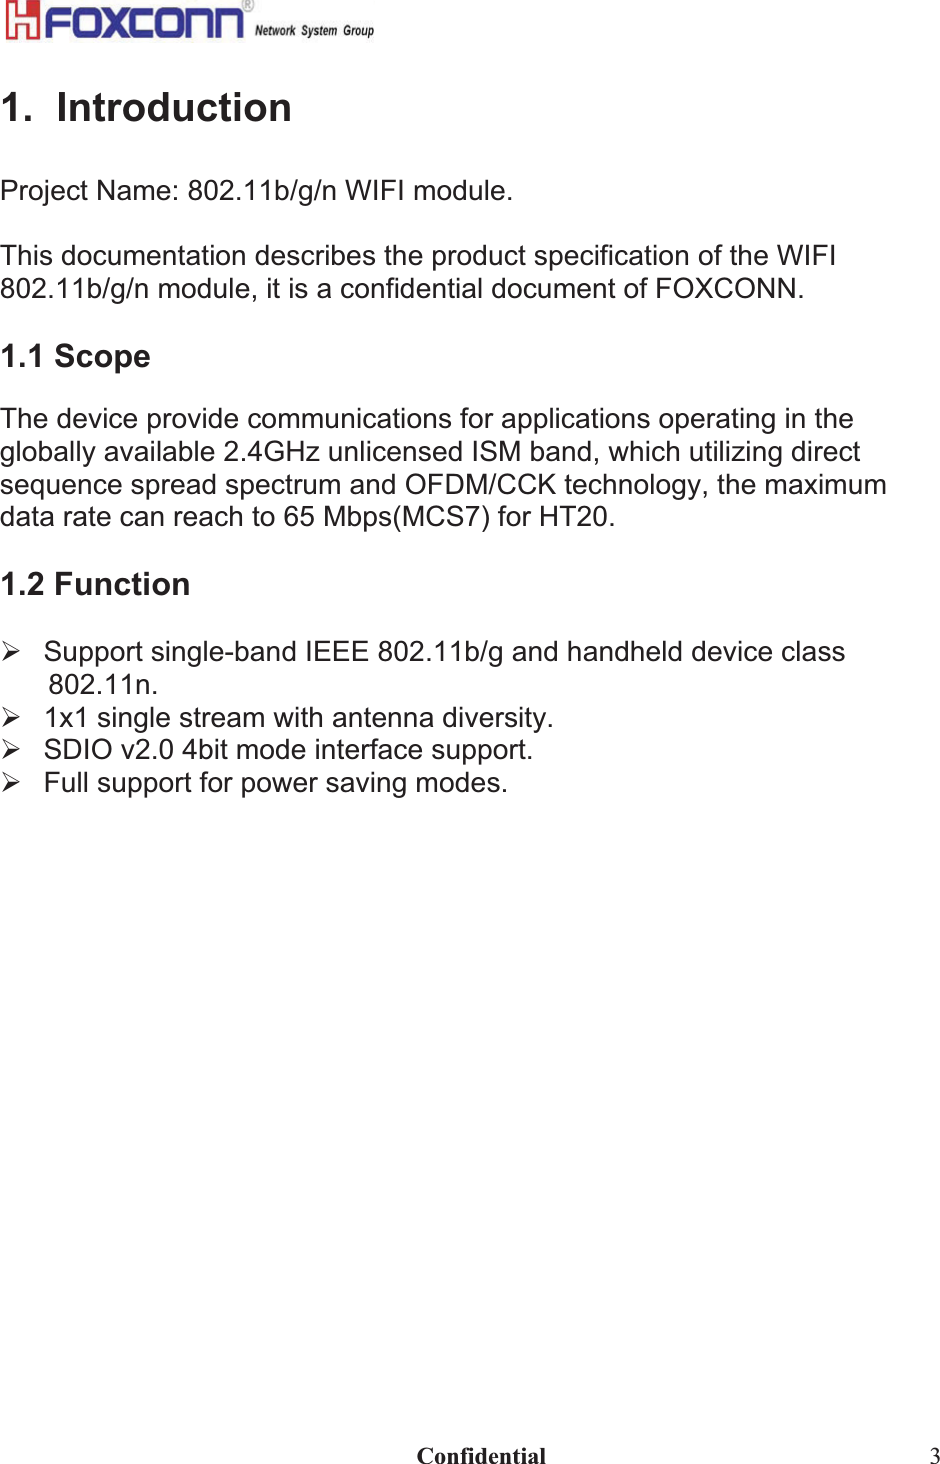                                                                              Confidential  31.  Introduction Project Name: 802.11b/g/n WIFI module. This documentation describes the product specification of the WIFI 802.11b/g/n module, it is a confidential document of FOXCONN. 1.1 Scope The device provide communications for applications operating in the globally available 2.4GHz unlicensed ISM band, which utilizing direct sequence spread spectrum and OFDM/CCK technology, the maximum data rate can reach to 65 Mbps(MCS7) for HT20. 1.2 Function ¾  Support single-band IEEE 802.11b/g and handheld device class 802.11n.¾  1x1 single stream with antenna diversity. ¾  SDIO v2.0 4bit mode interface support. ¾  Full support for power saving modes. 